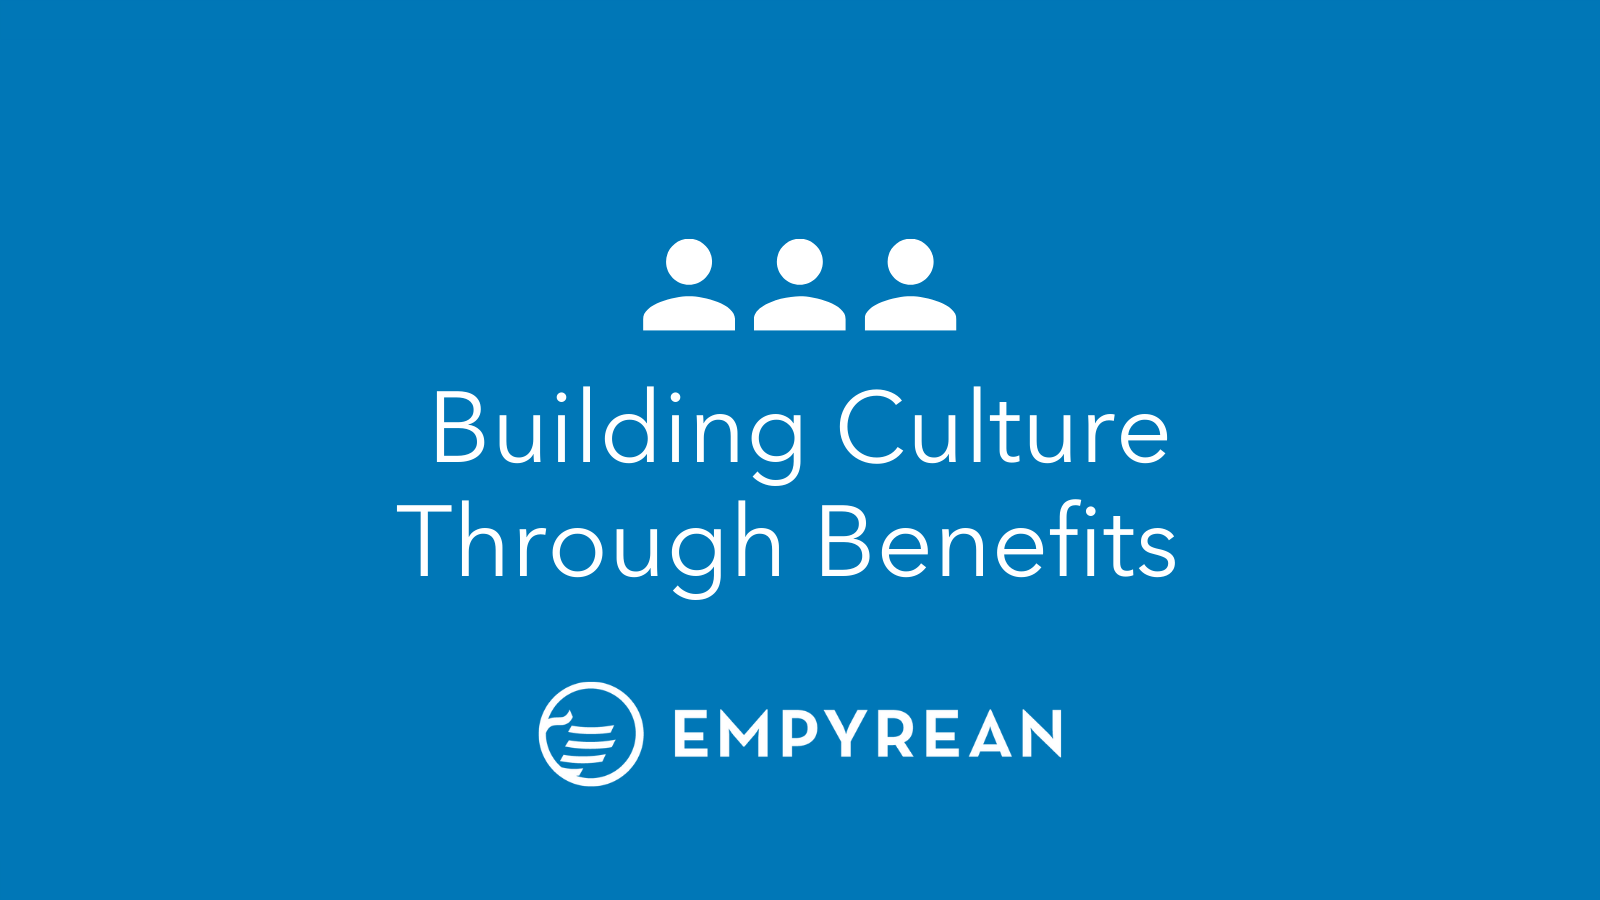 Empyrean Launches New Brand Messaging, Enhanced Corporate Website Focused on the Critical Role Benefits Play in Building Positive Workplace Cultures